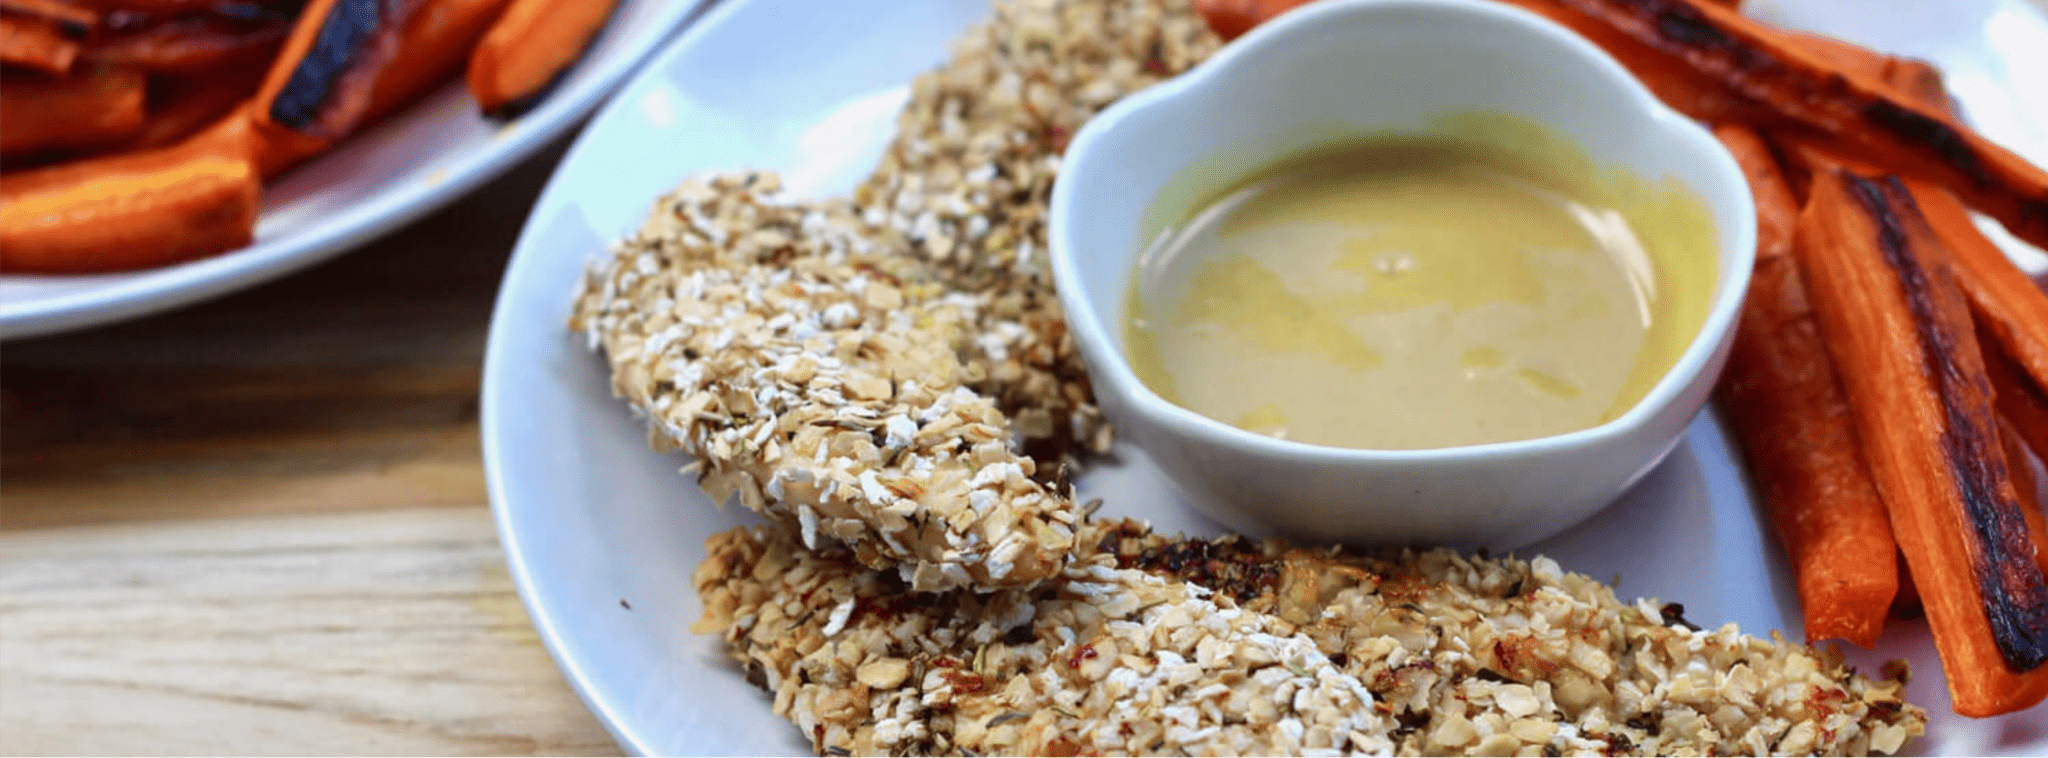 Healthy Lunch Ideas for Kids | Baby Chick